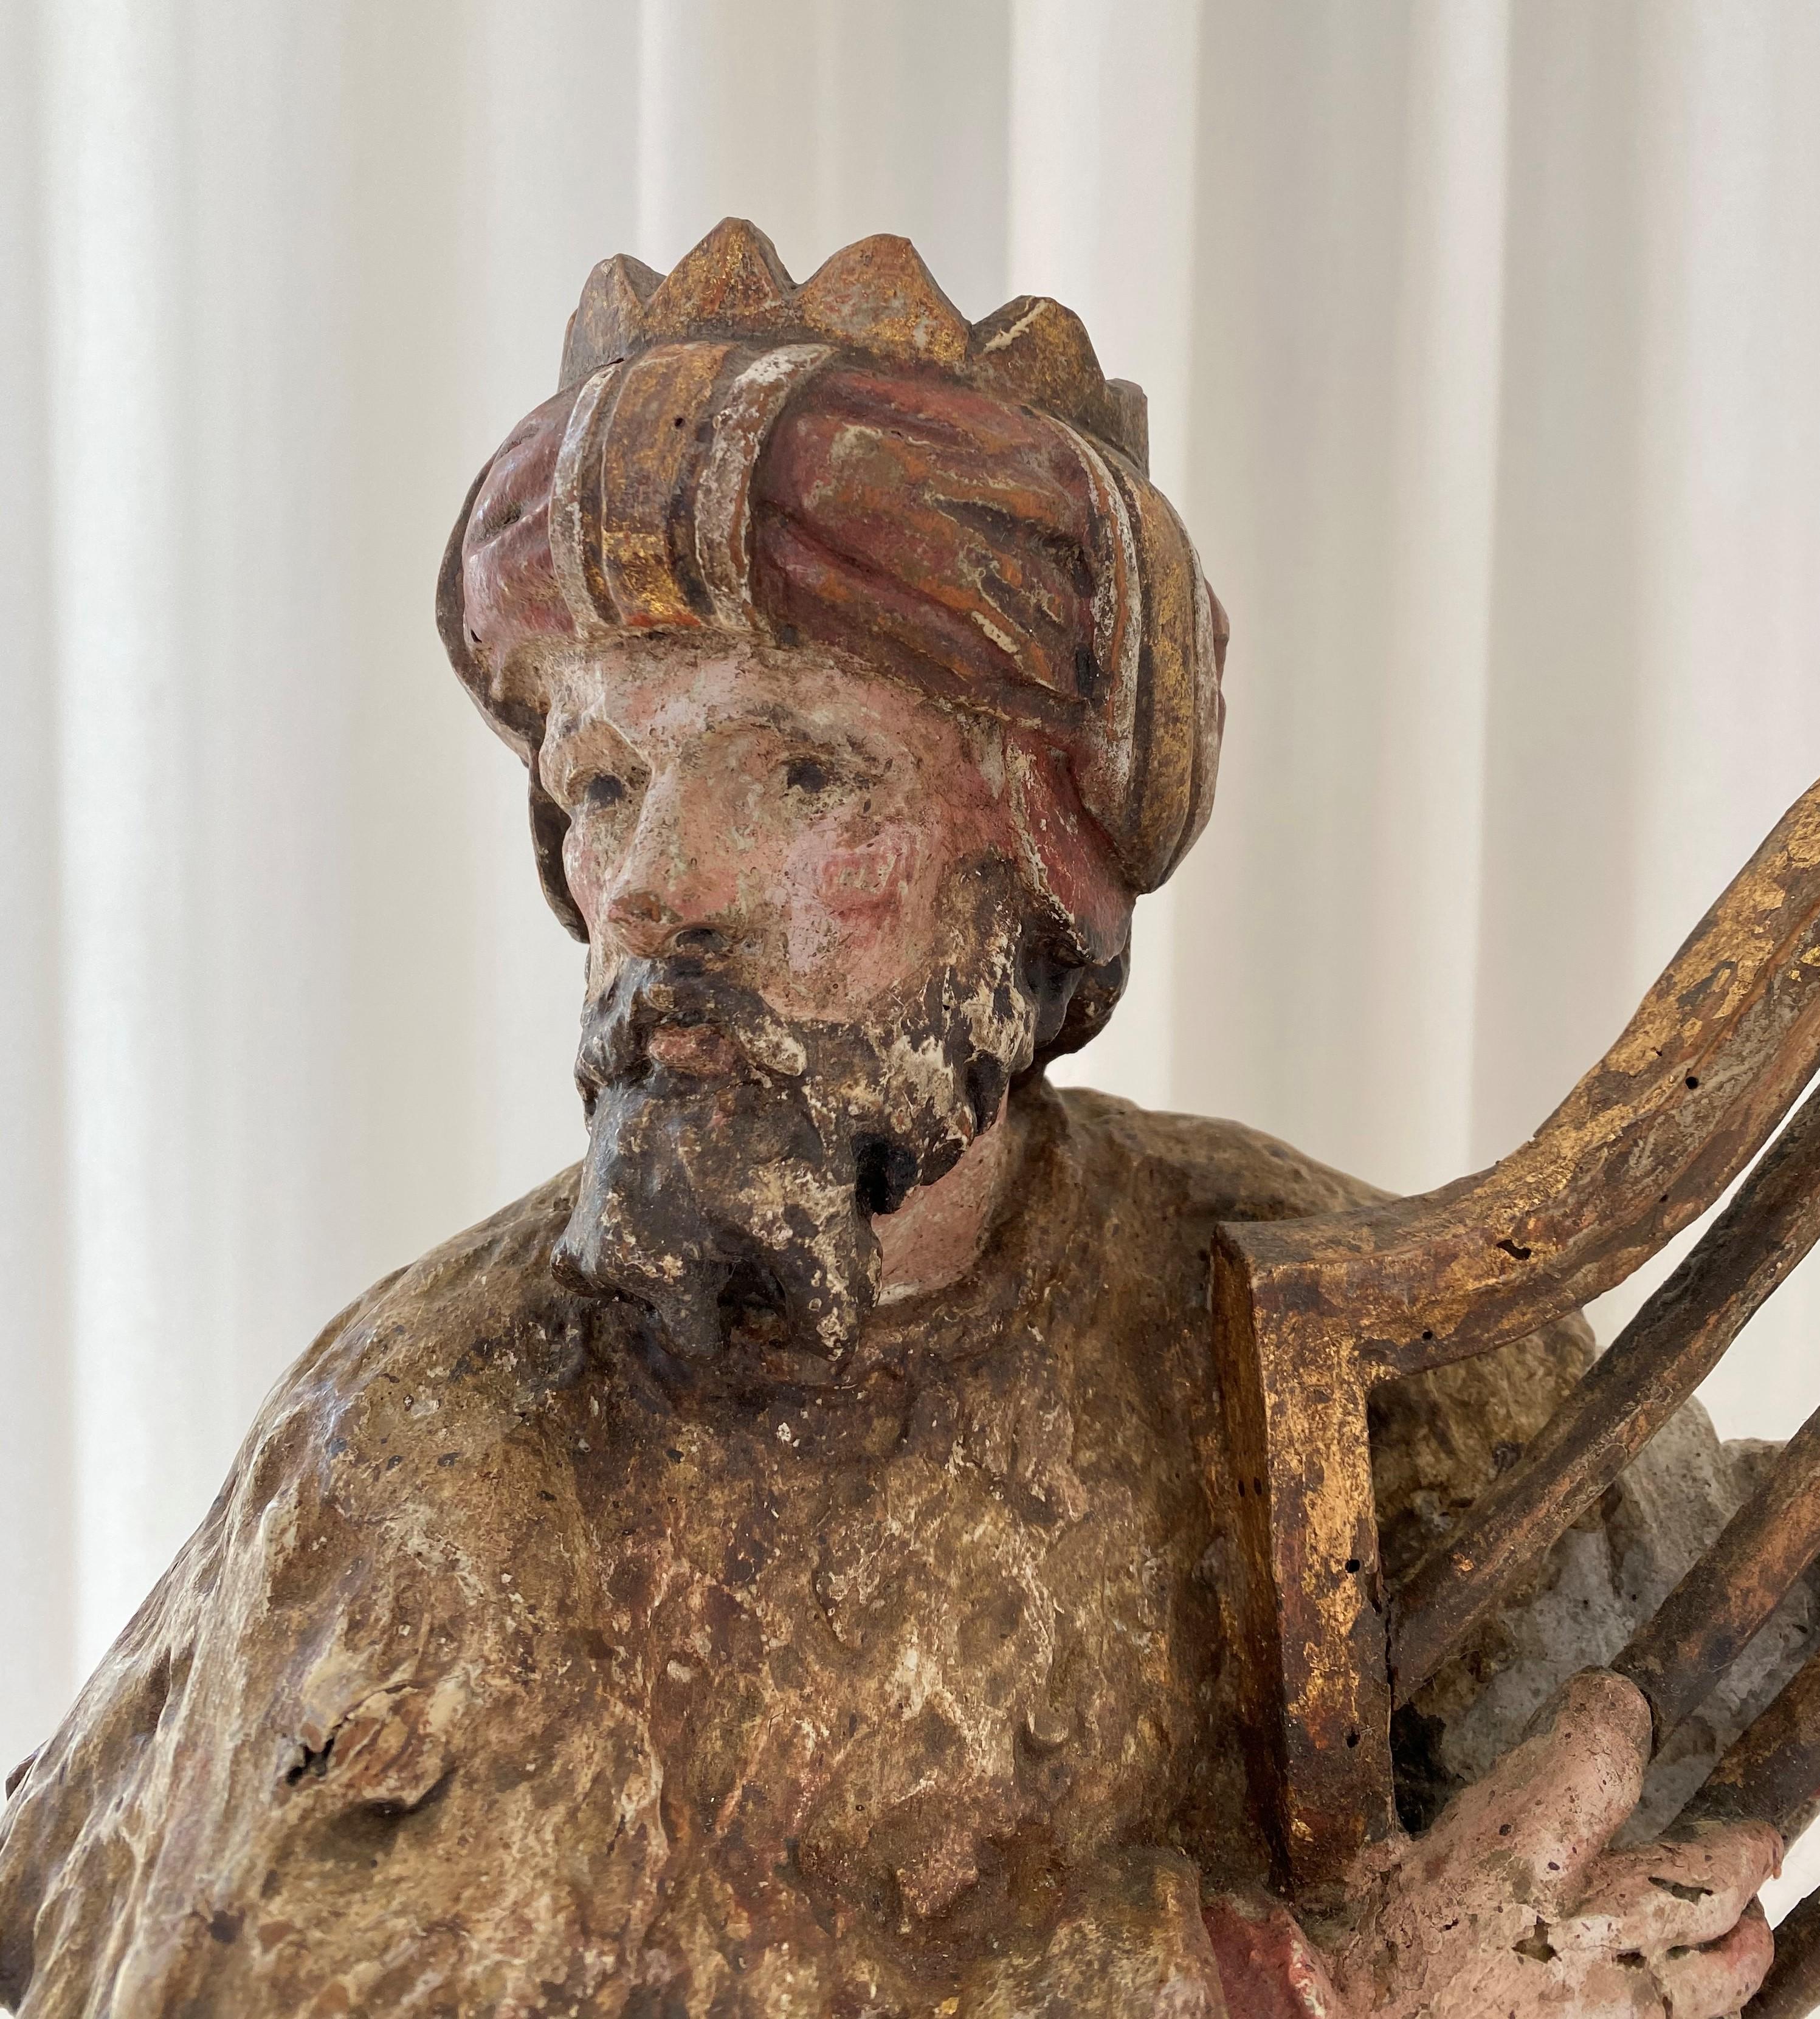 Belgian 17th Century Polychrome Carved Sculpture of King David Playing the Harp